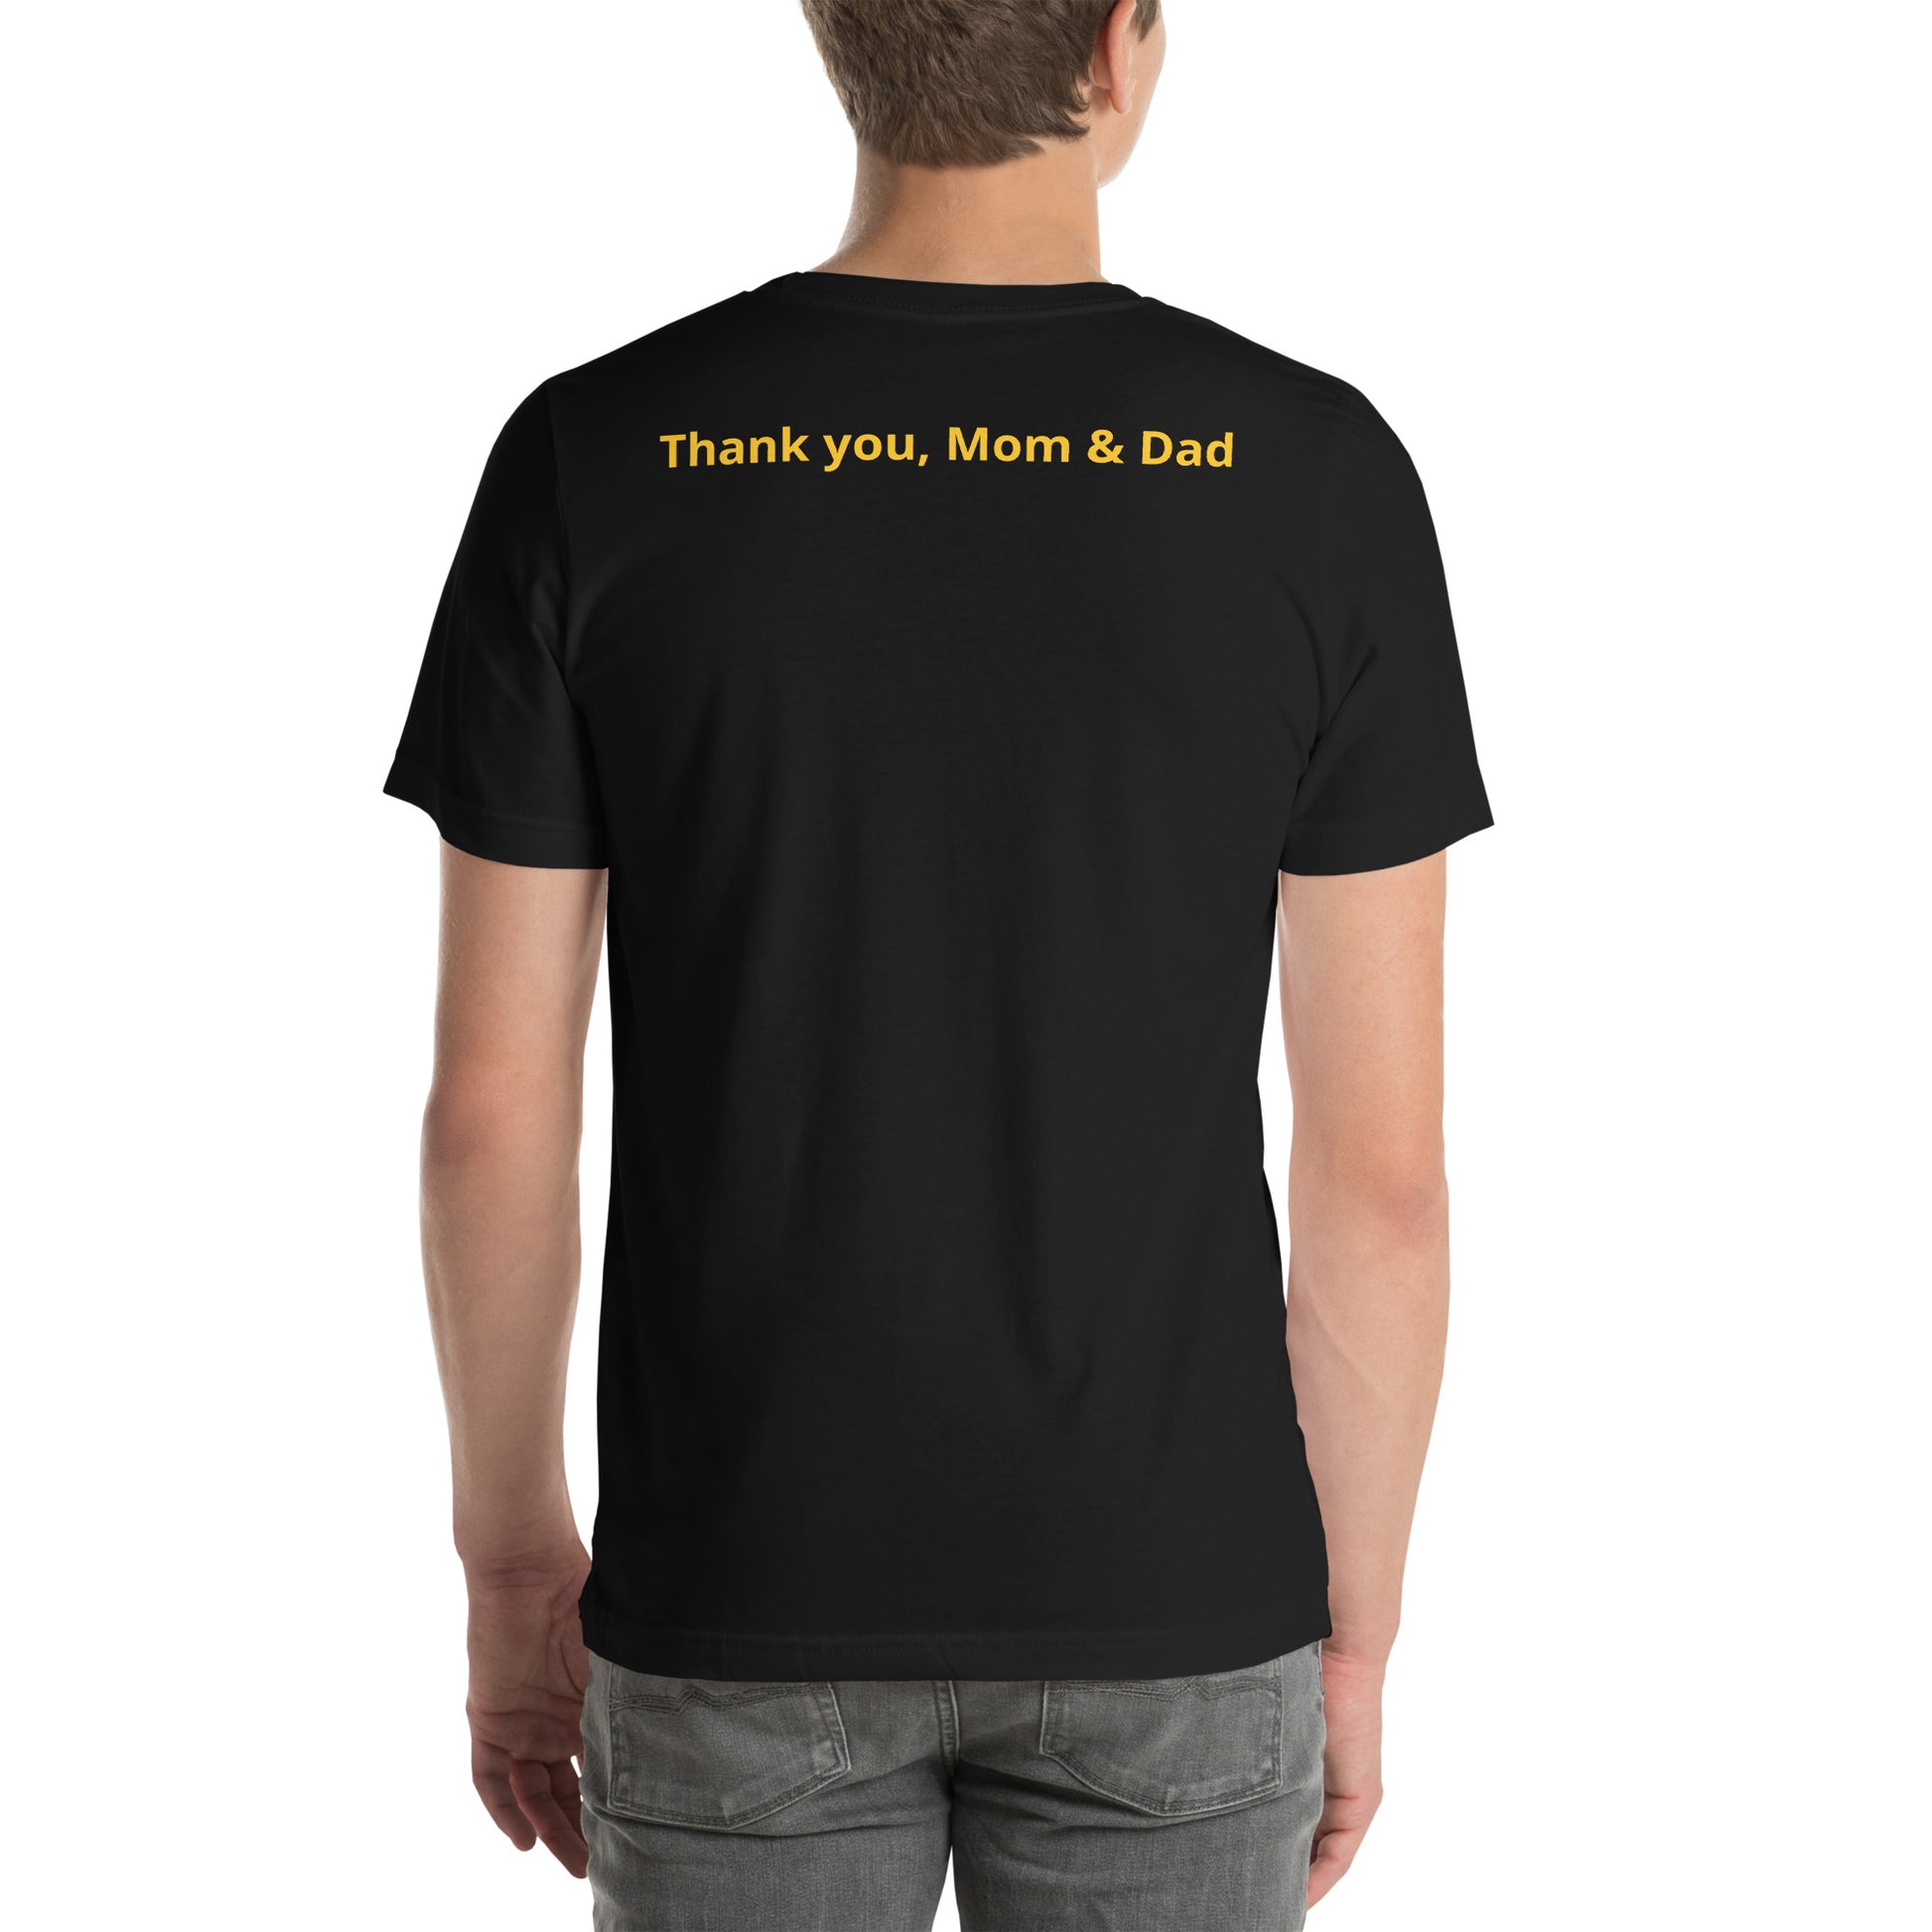 Black color short sleeve tee shirt that says "College '24 Grad" on the front and "Thank you, Mom & Dad" on the back in yellow-gold font